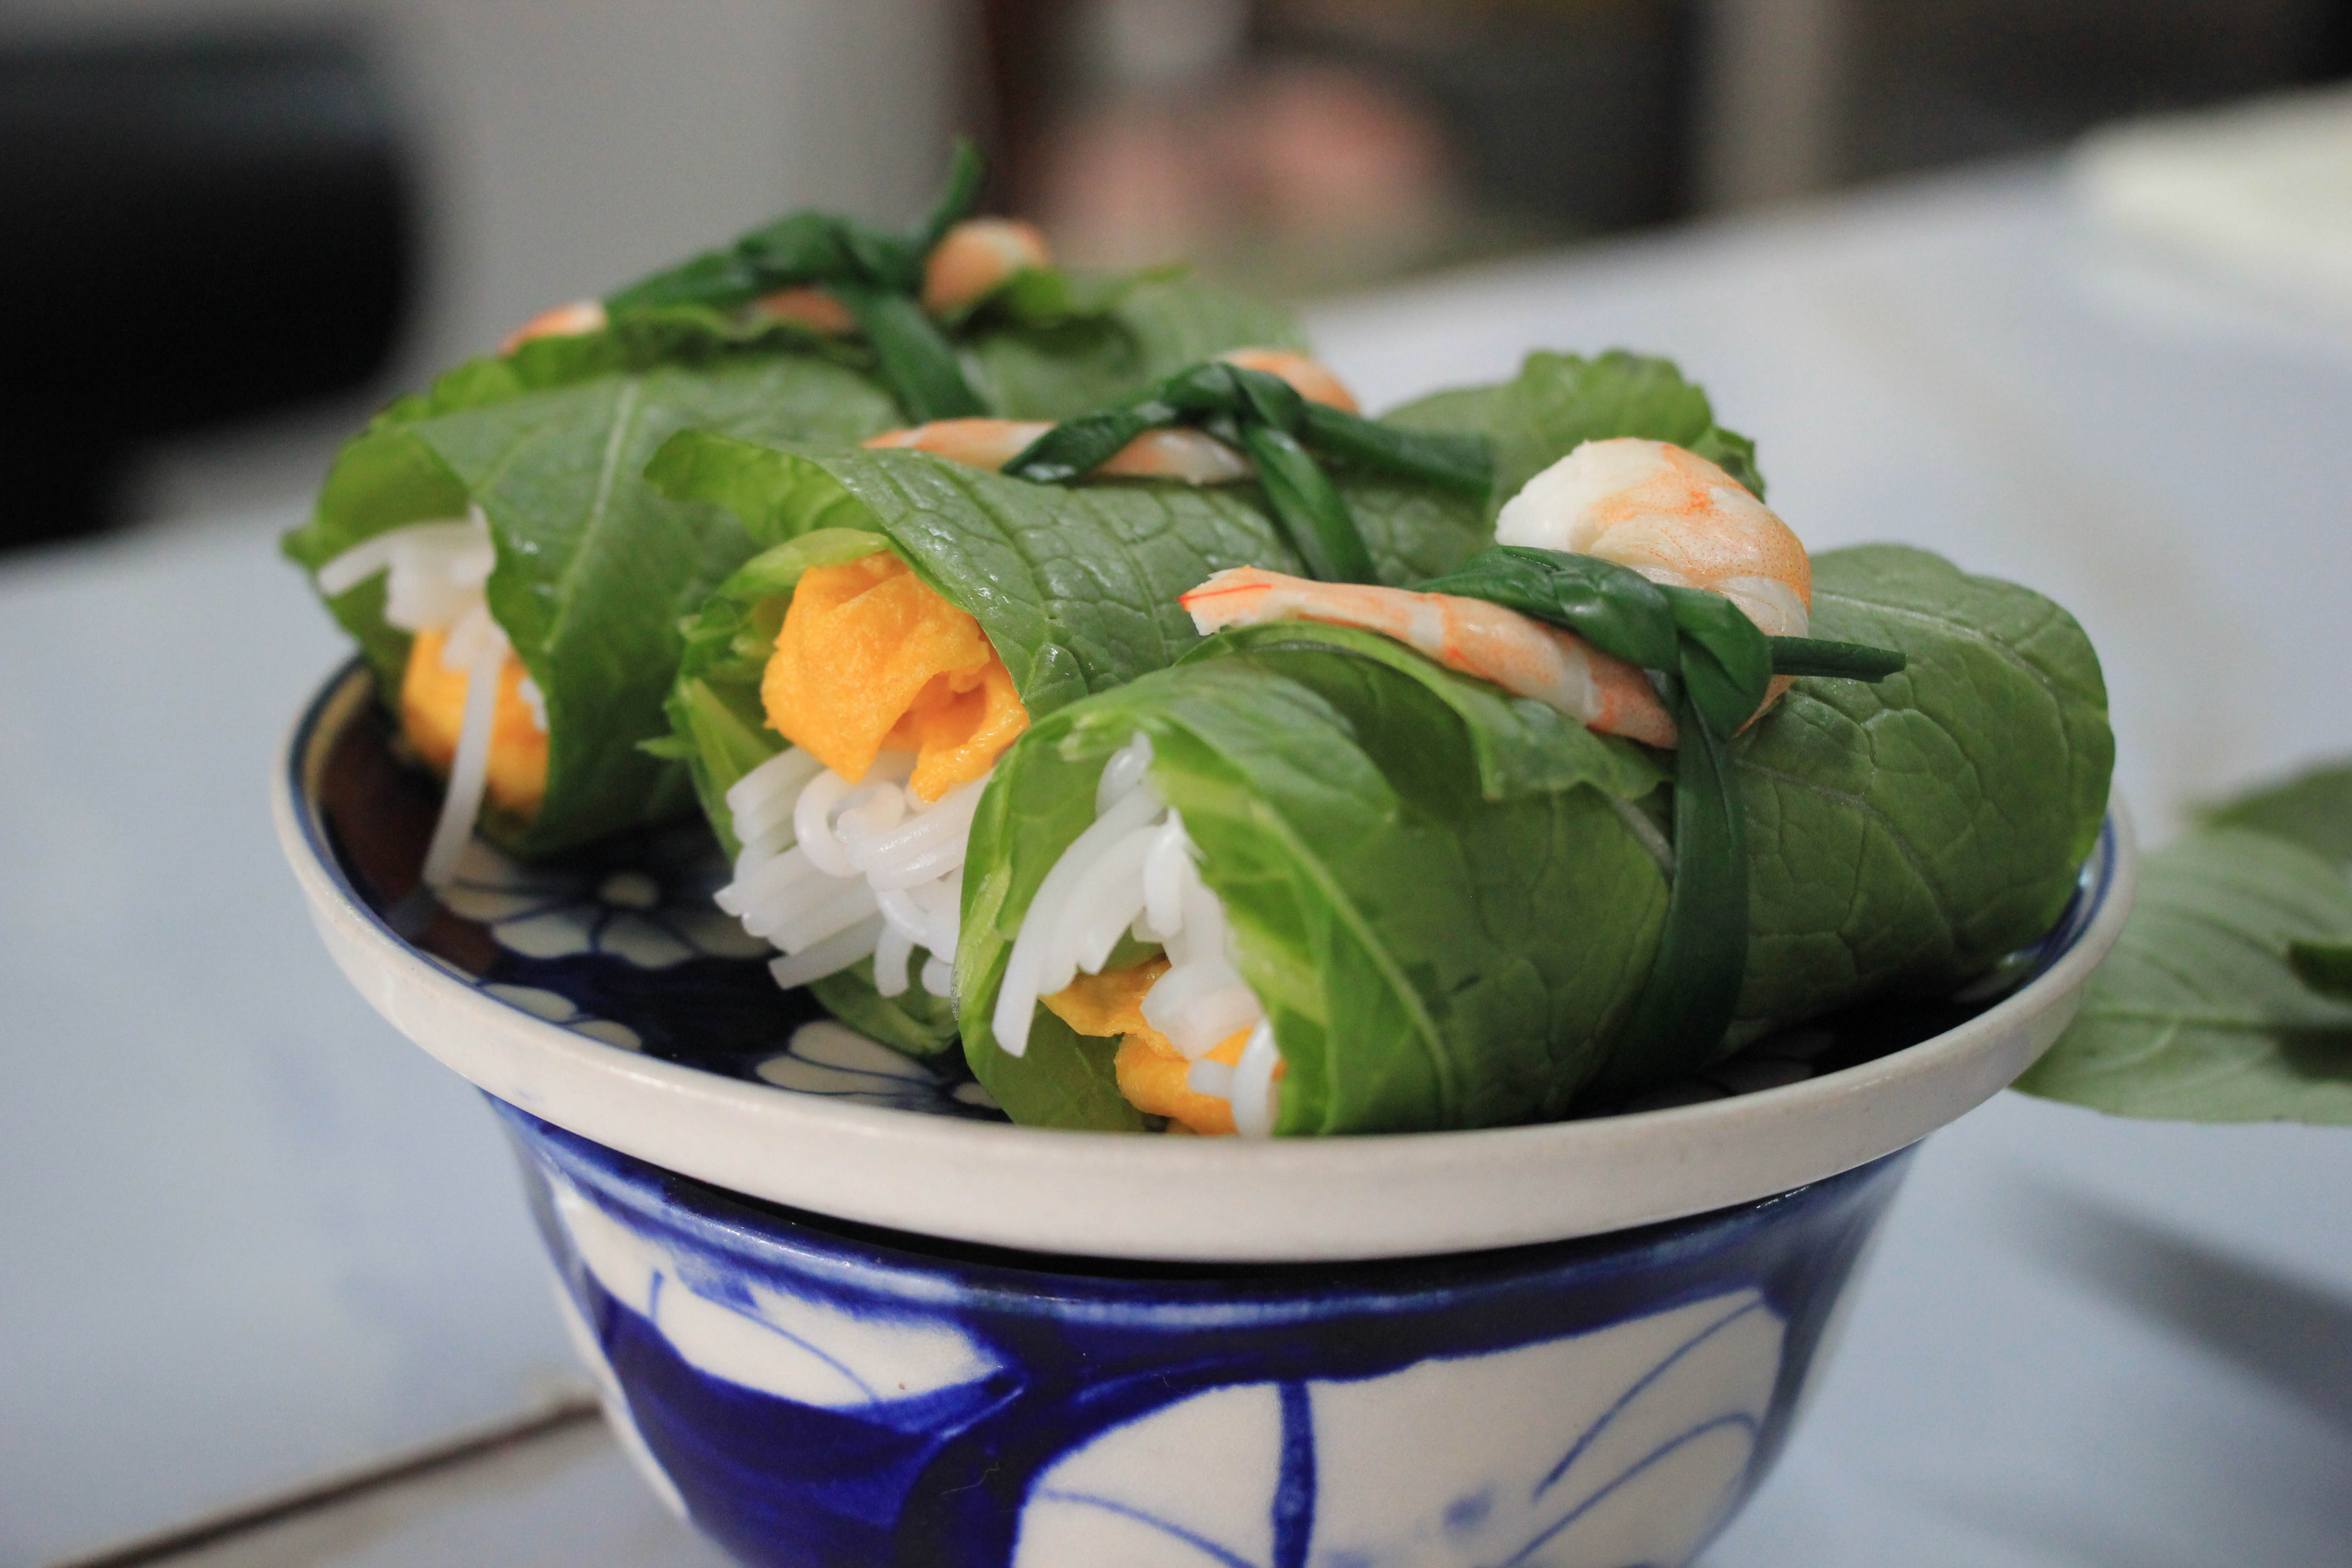 Three rolls of cuốn diếp, a delicacy from northern Vietnam. Photo: Dong Nguyen/Tuoi Tre News